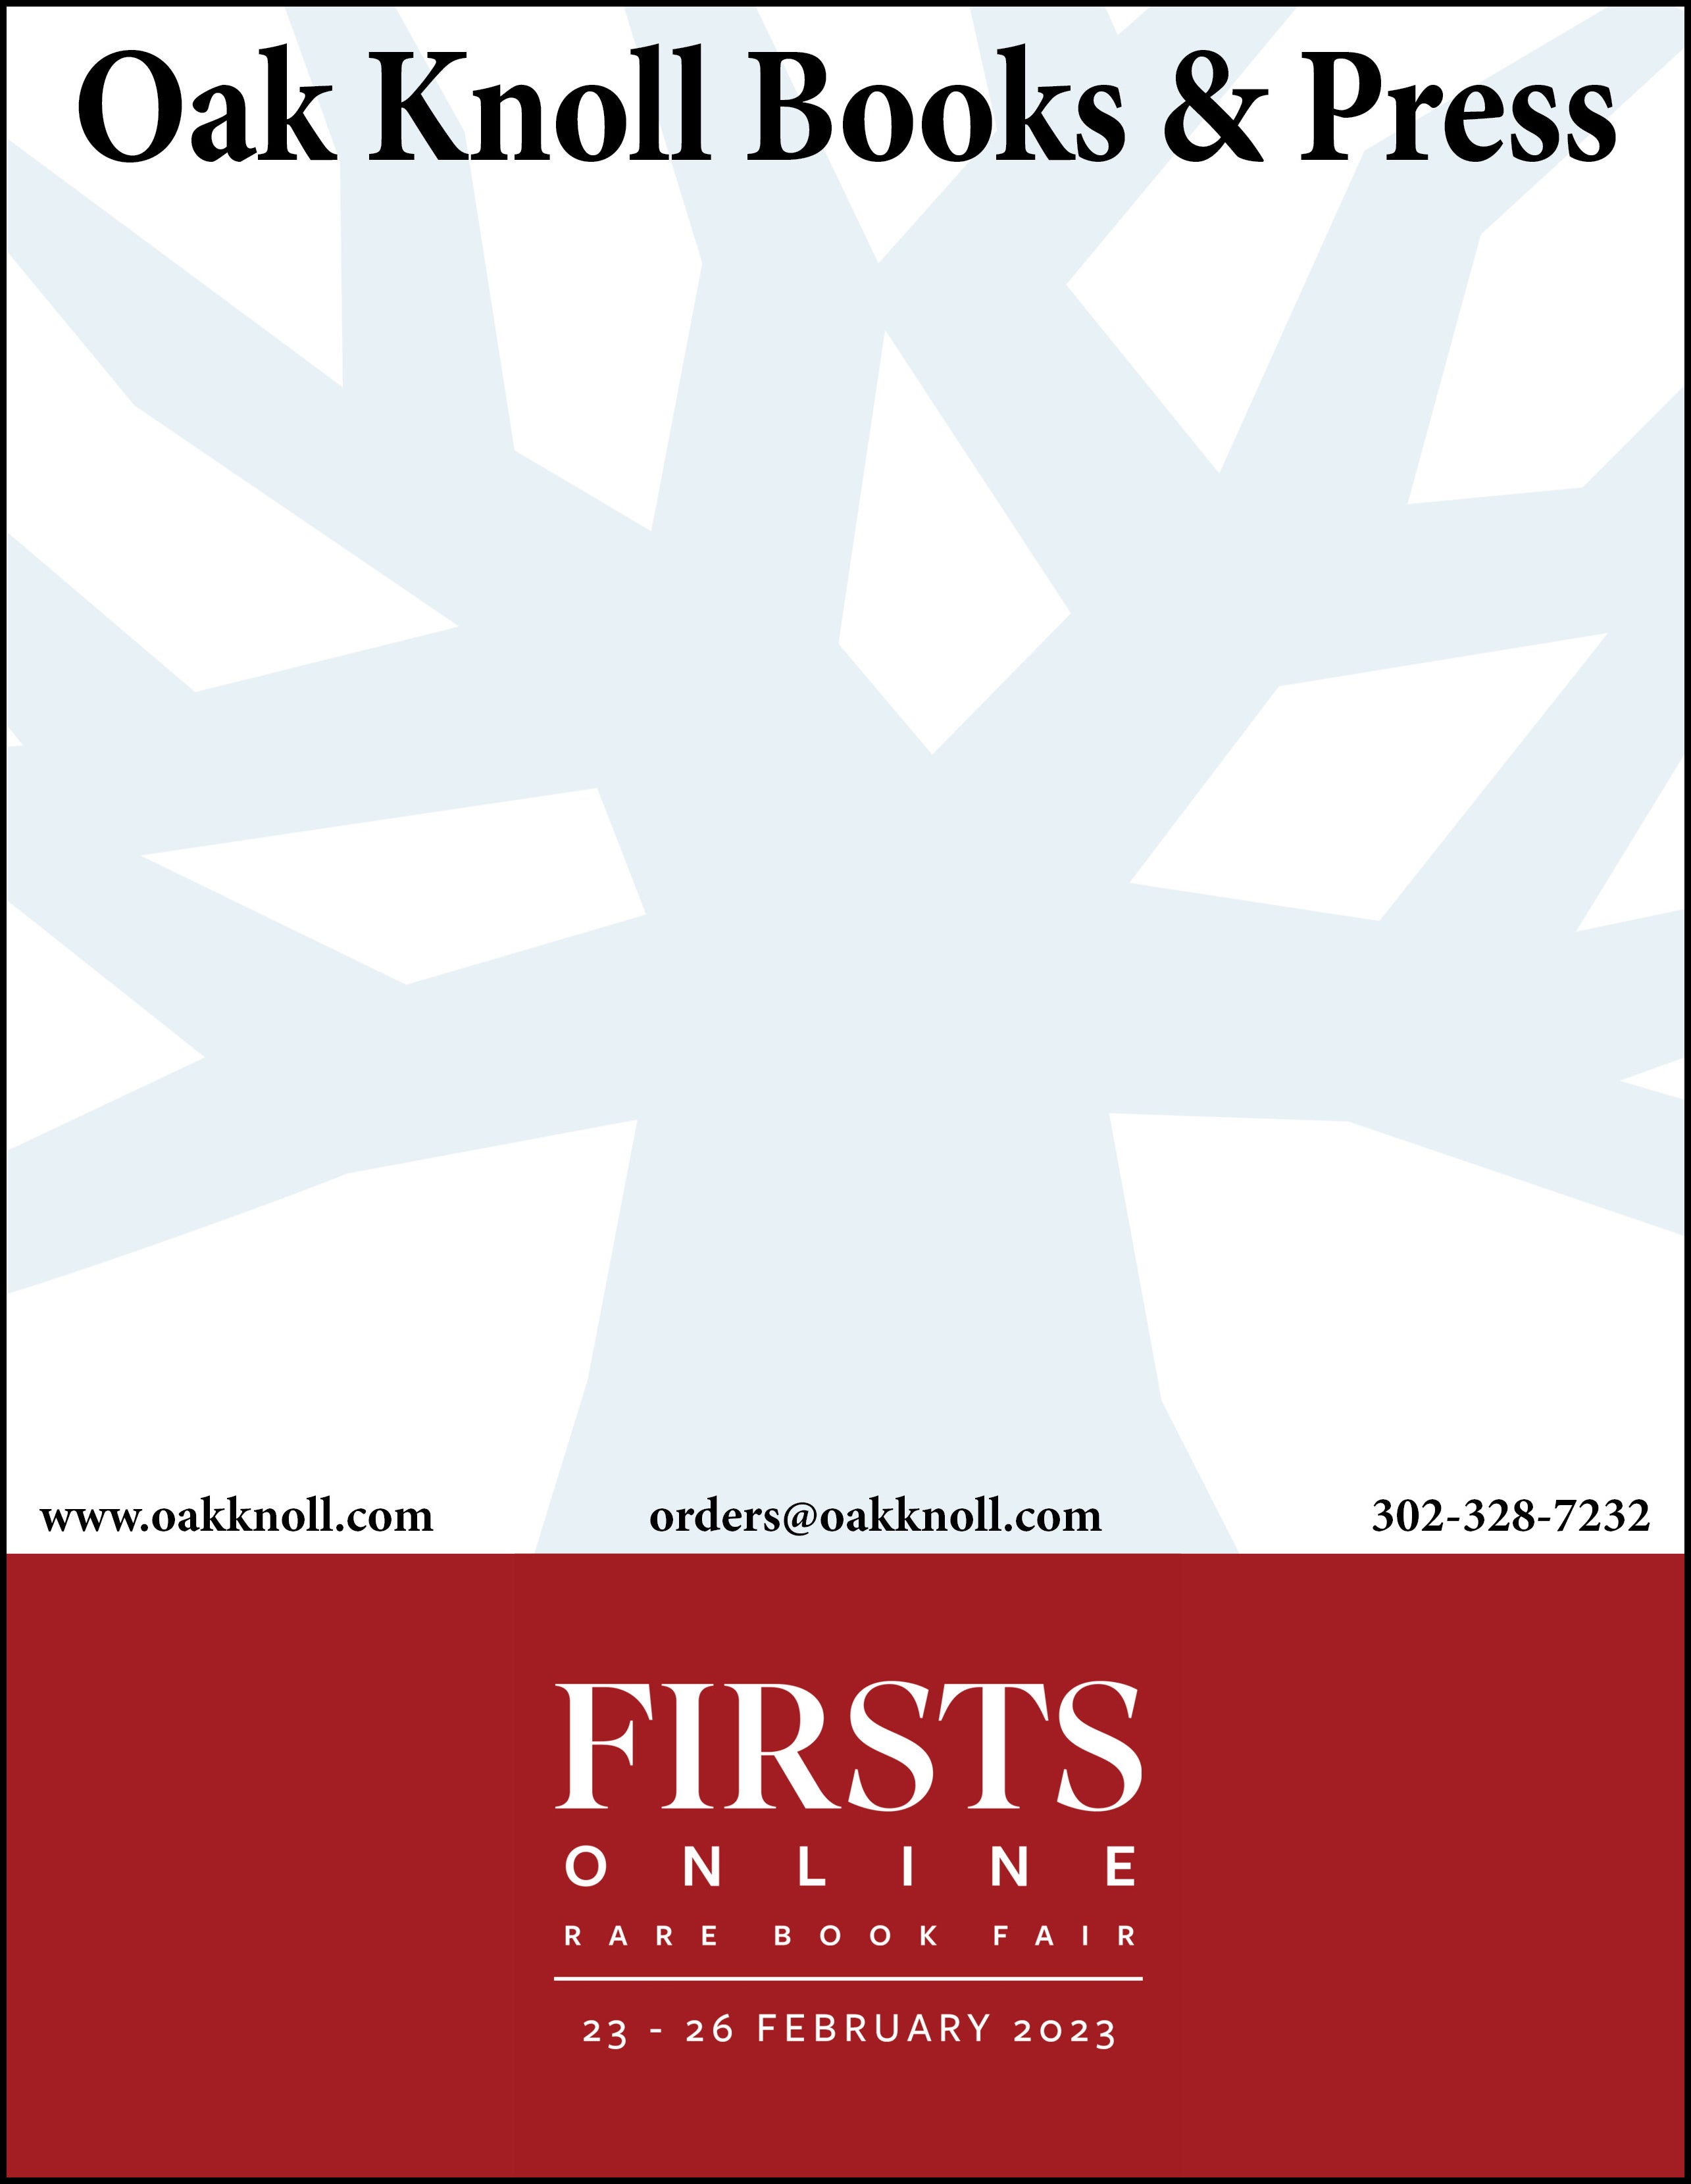 FIRSTS ONLINE BOOKFAIR FEBRUARY 2023